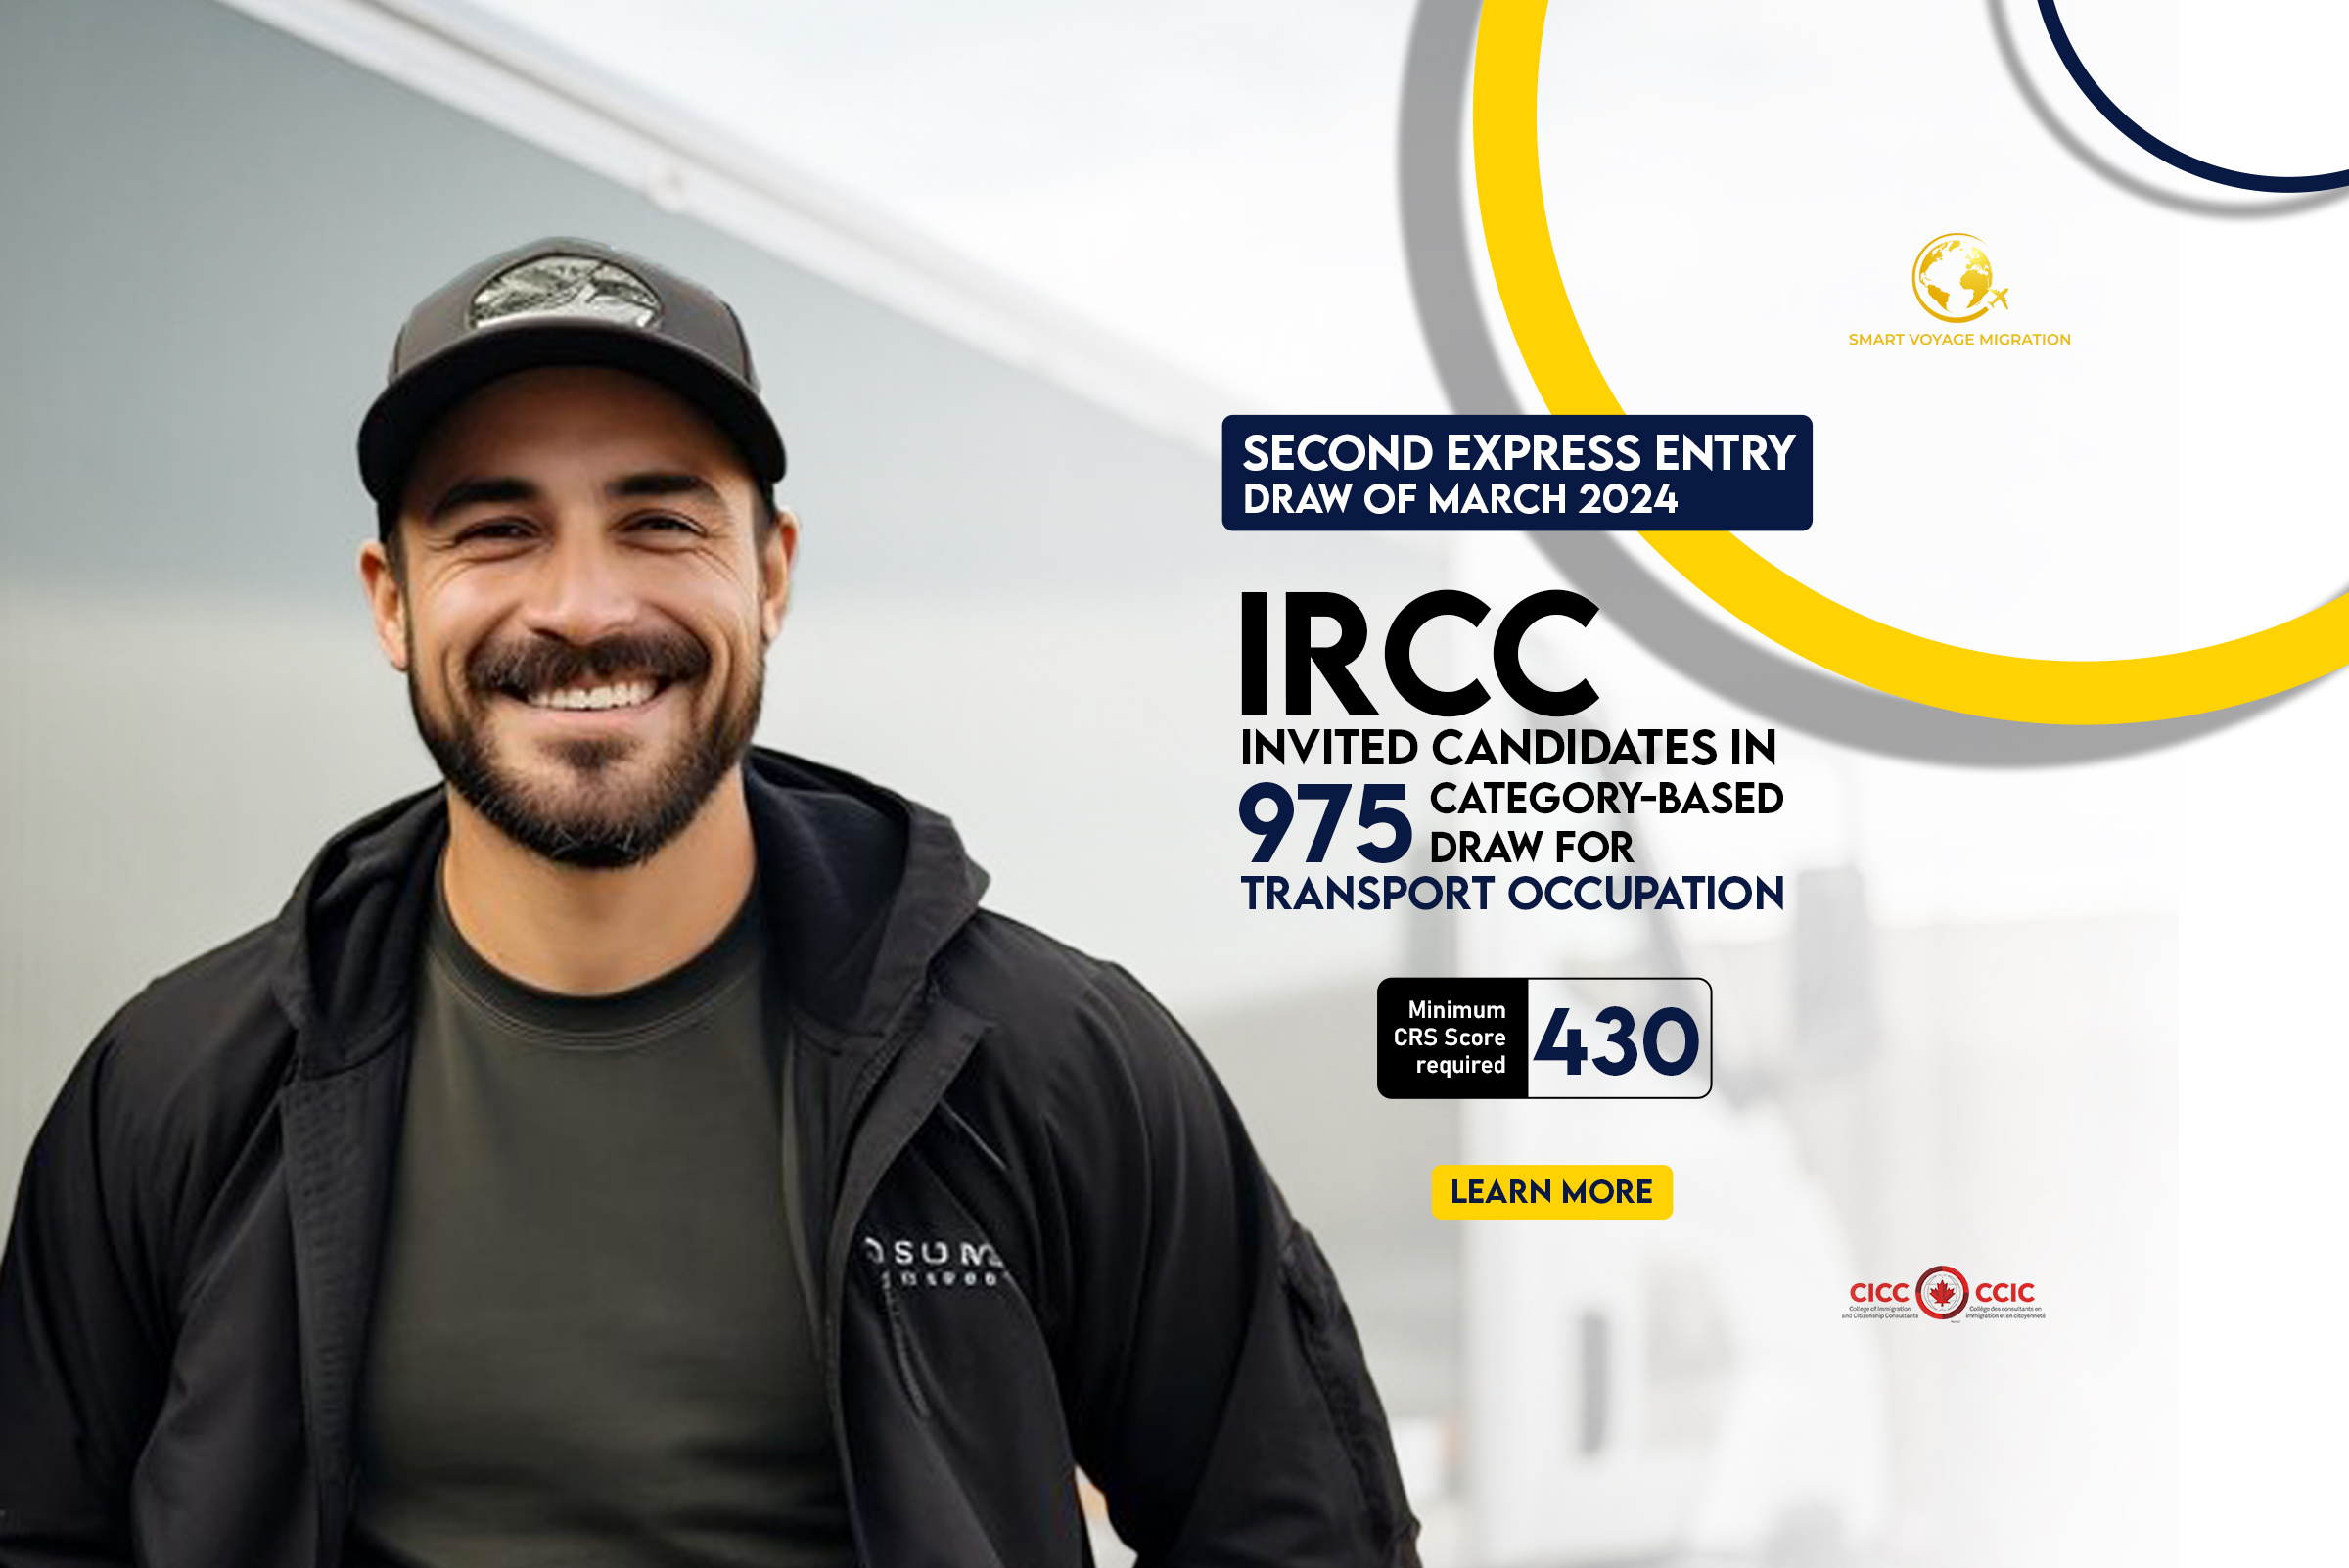 The IRCC invited 975 Express Entry candidates in the first transport occupation draw of 2024.